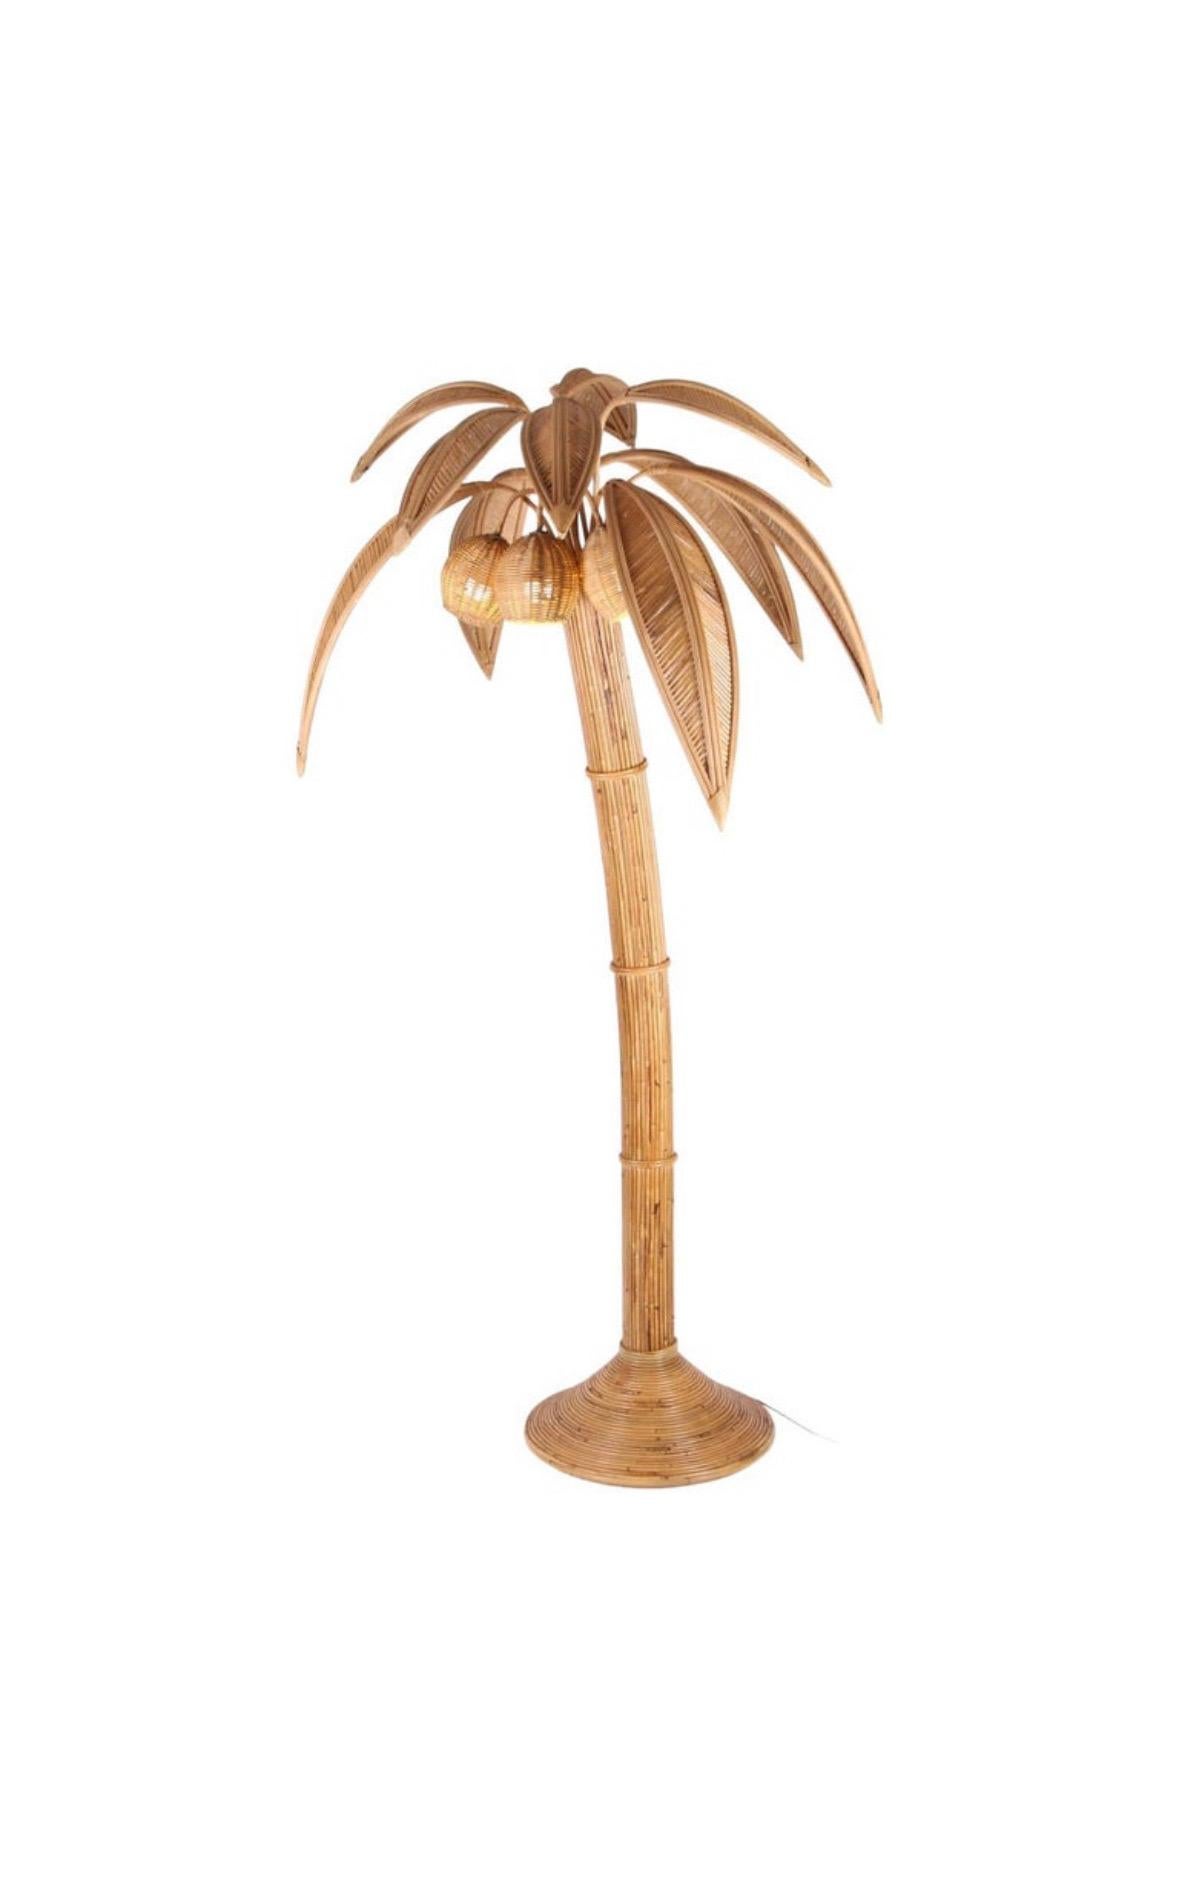 Amazing rattan floor lamp with ten adjustable palms and lights in the 3 coconuts.
Very decorative, this floor lamp is a promise of holidays and sun.
High quality work, all hand made, excellent condition. 